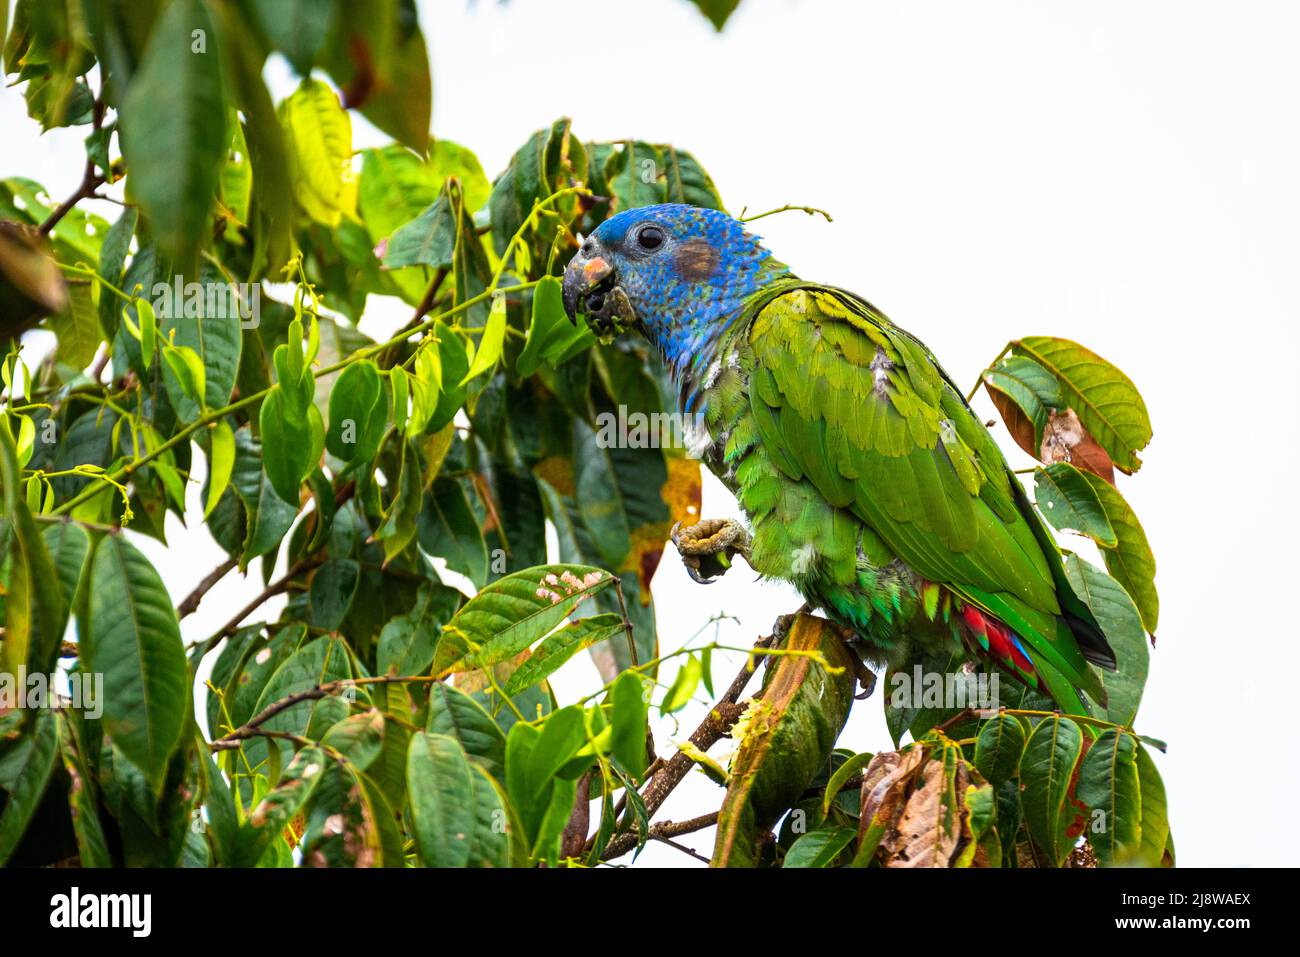 Blue headed parrot feeding on a tree from seeds Stock Photo